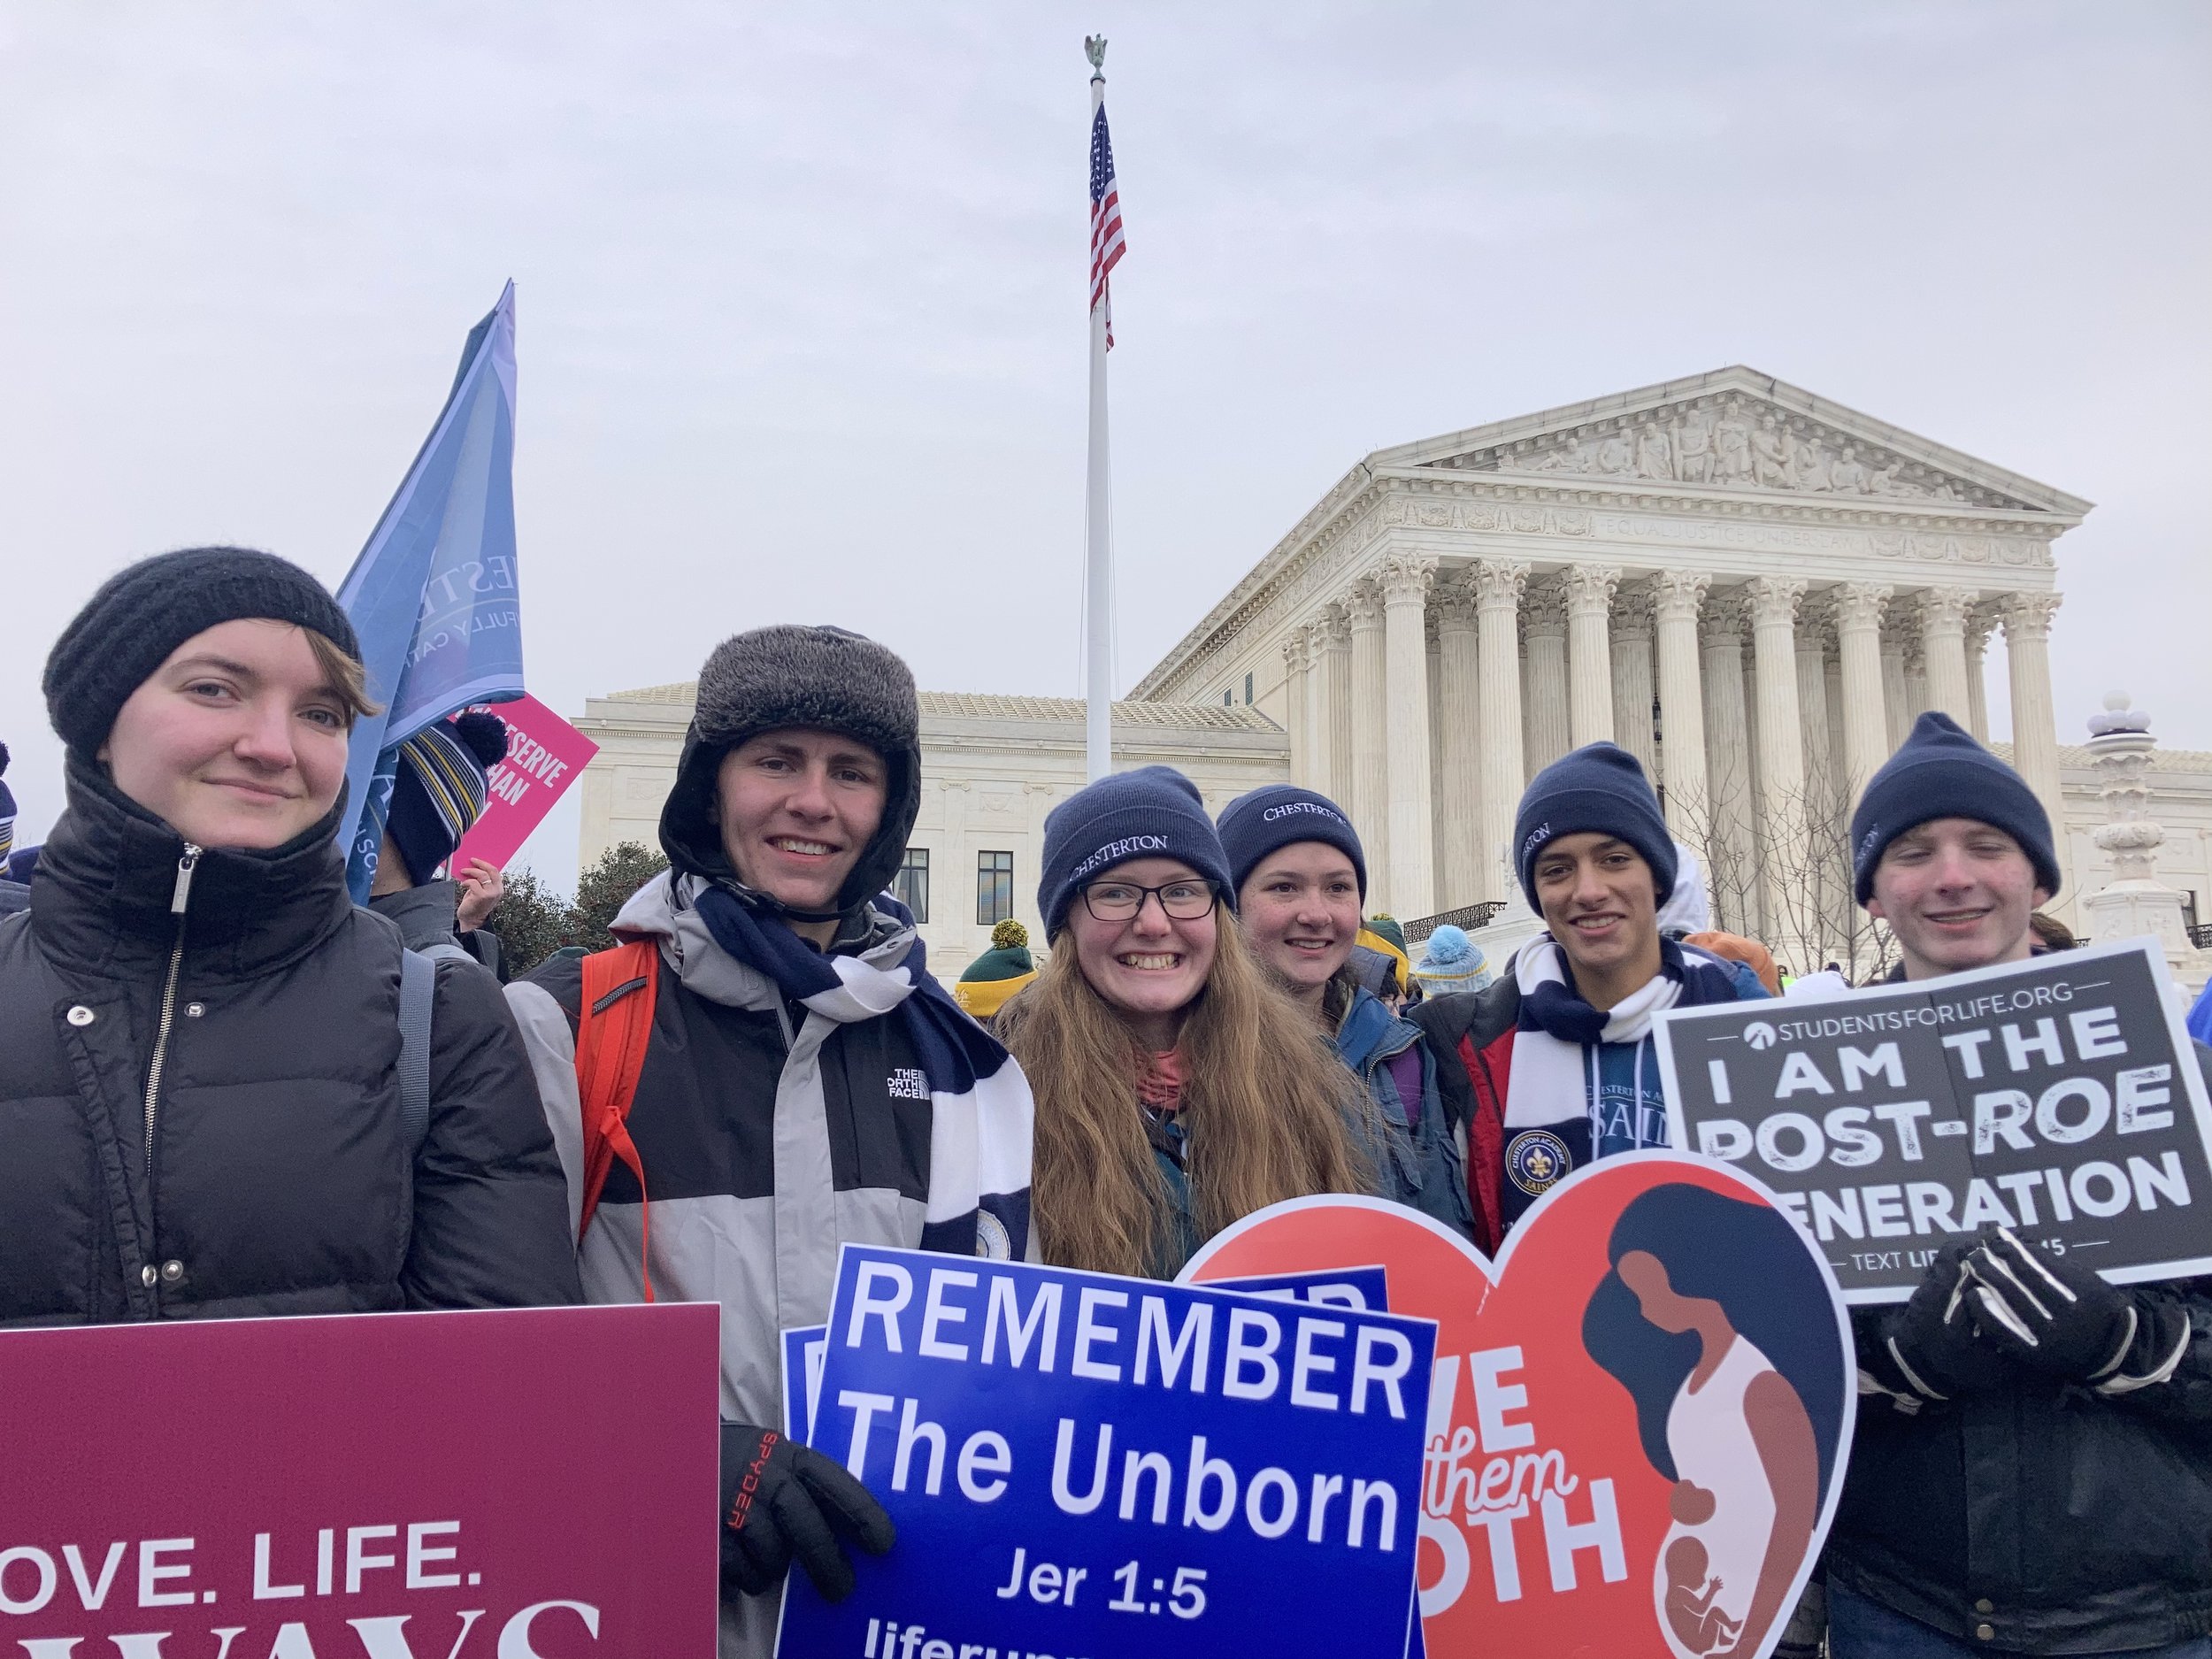 At the end of the March for Life outside the US Supreme Court where the ruling on Dobbs v. Jackson will be revealed in June 2022